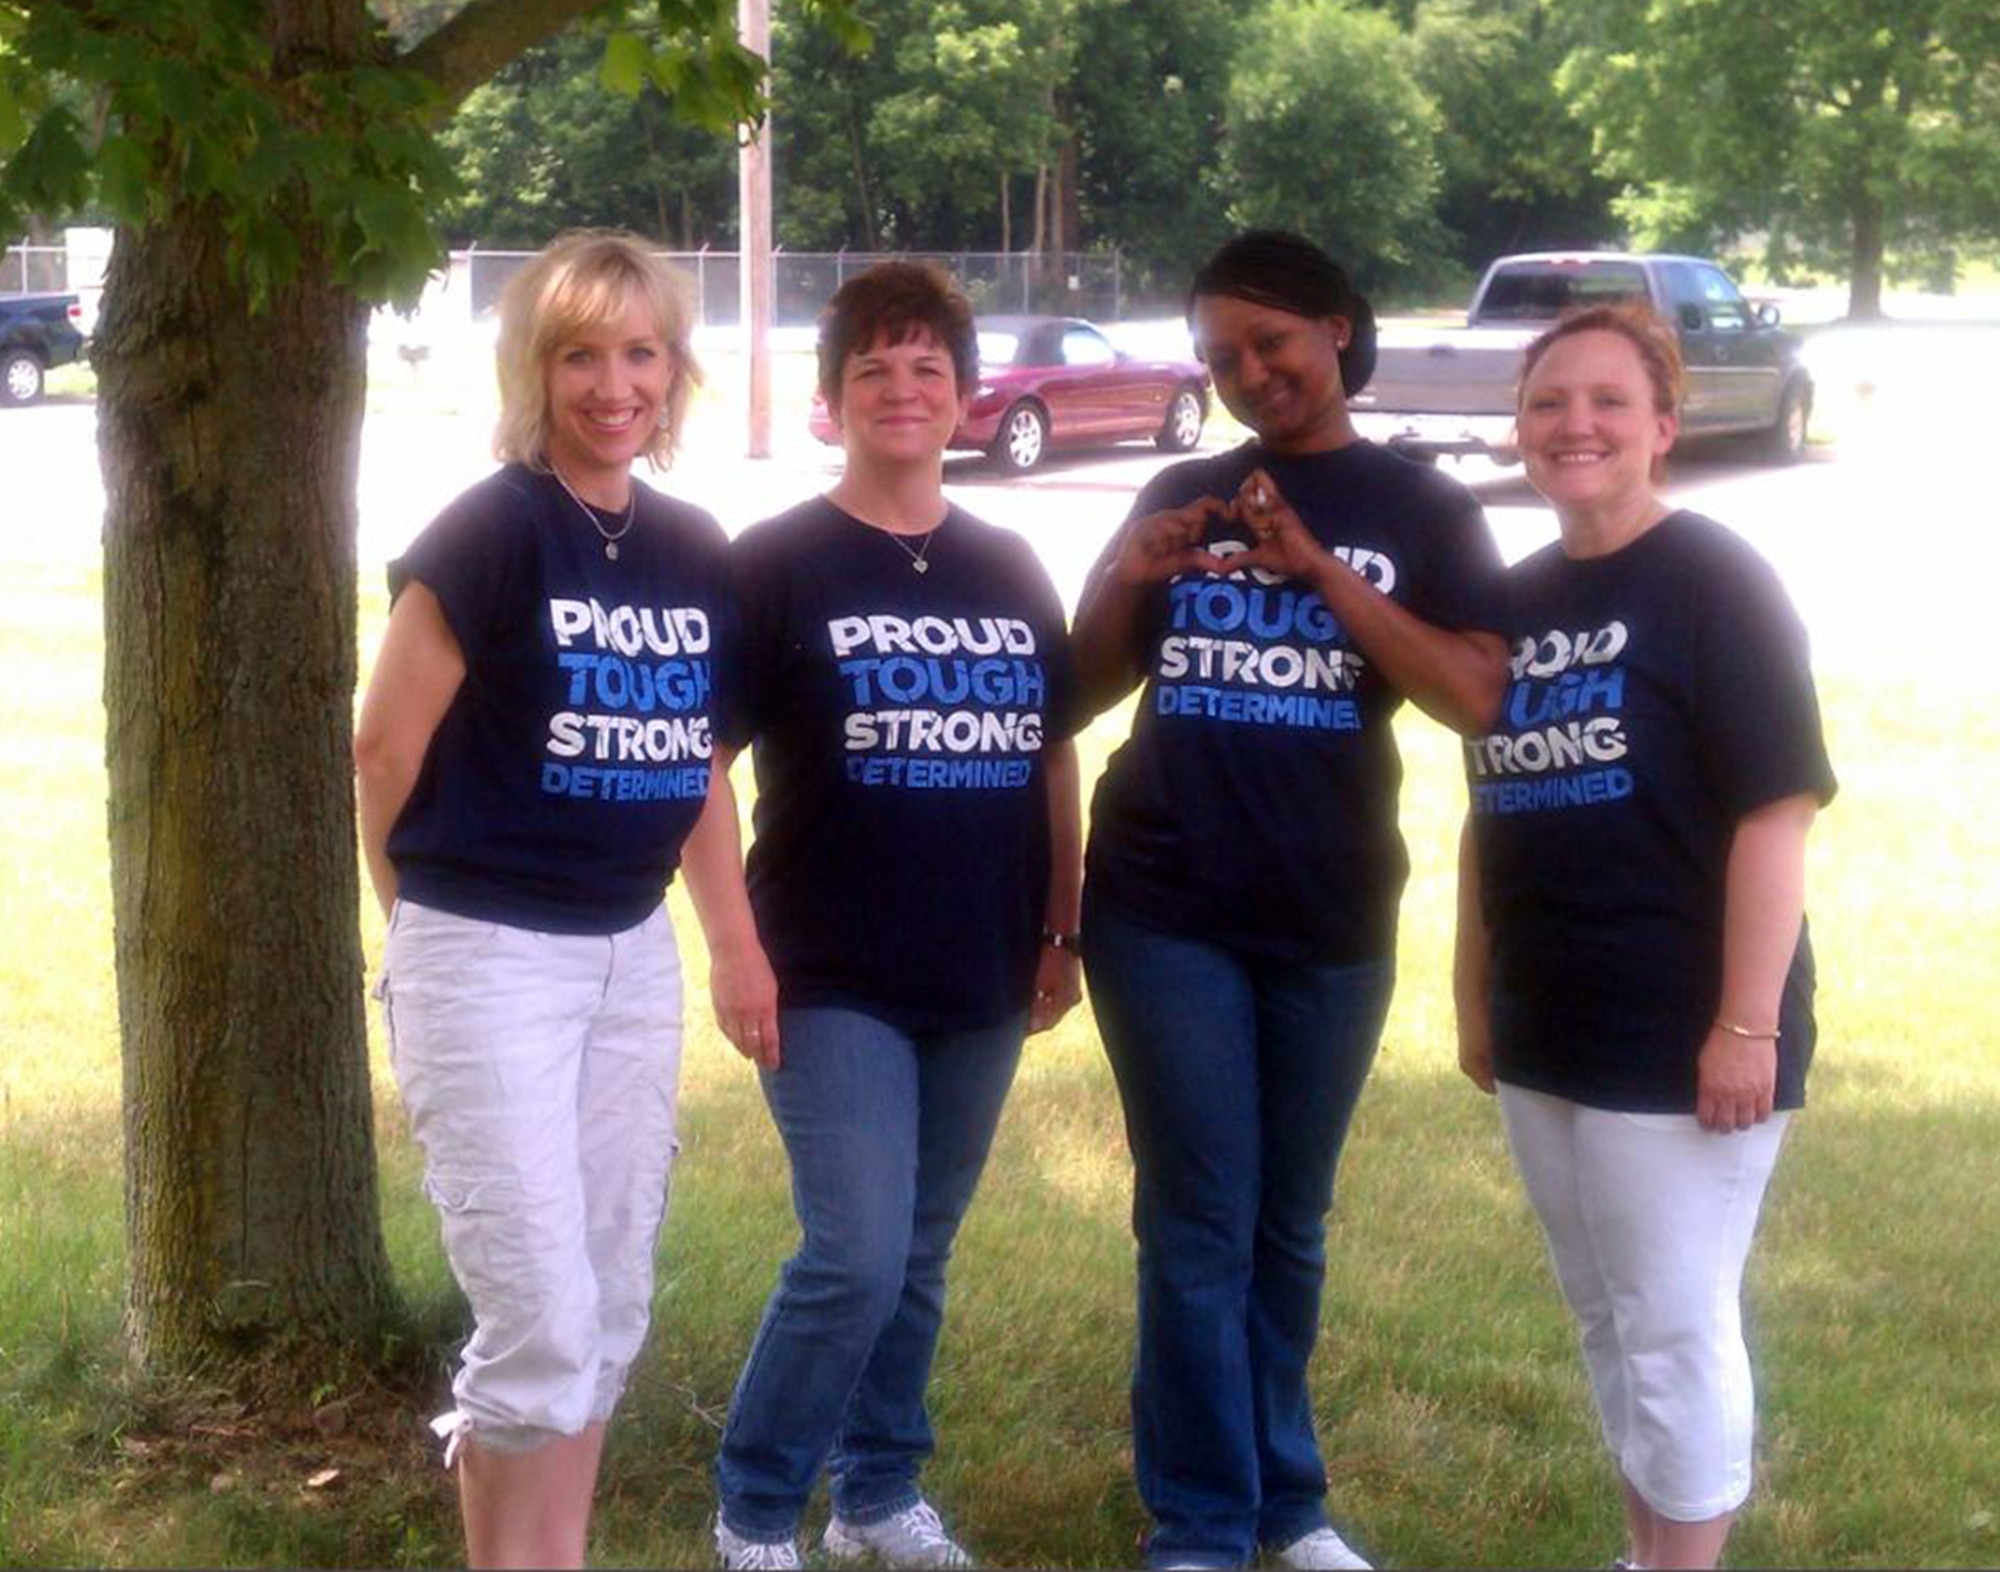 WRIGHT-PATTERSON AIR FORCE BASE, Ohio – The 445th Airlift Wing supported Post Traumatic Stress Disorder Awareness Day June 27. To show their support, t-shirts printed with the words, “PROUD, TOUGH, STRONG, DETERMINED” were worn by wing members throughout the day. Leading the effort was the North Region Psychological Health Advocacy Program staff (from left to right); Pamela Boyd, Outreach Specialist, Melanie McMann. Outreach Specialist, Samarra Appling, Administrative Specialist, Jennifer Wedel Case Facilitator. (Courtesy photo)